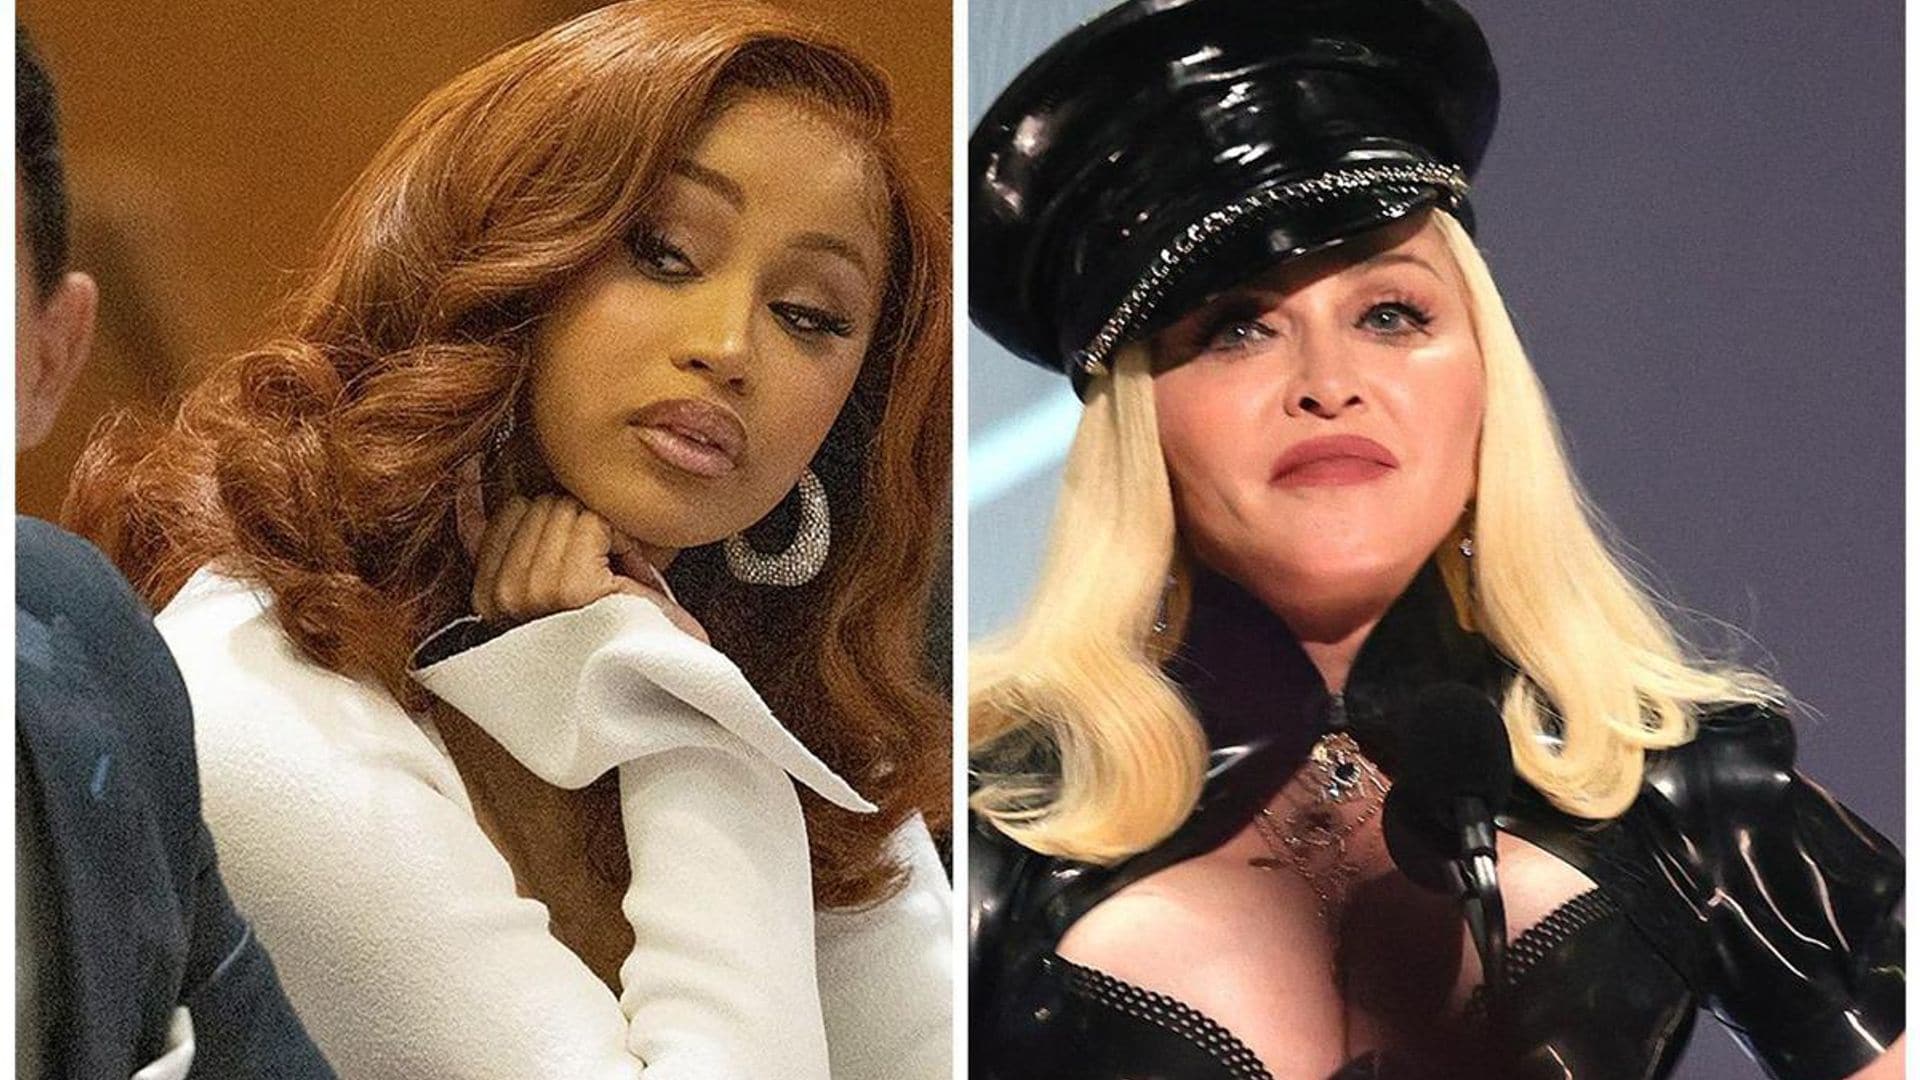 Madonna and Cardi B reconcile after the singer took credit for paving way for women to embrace sexuality